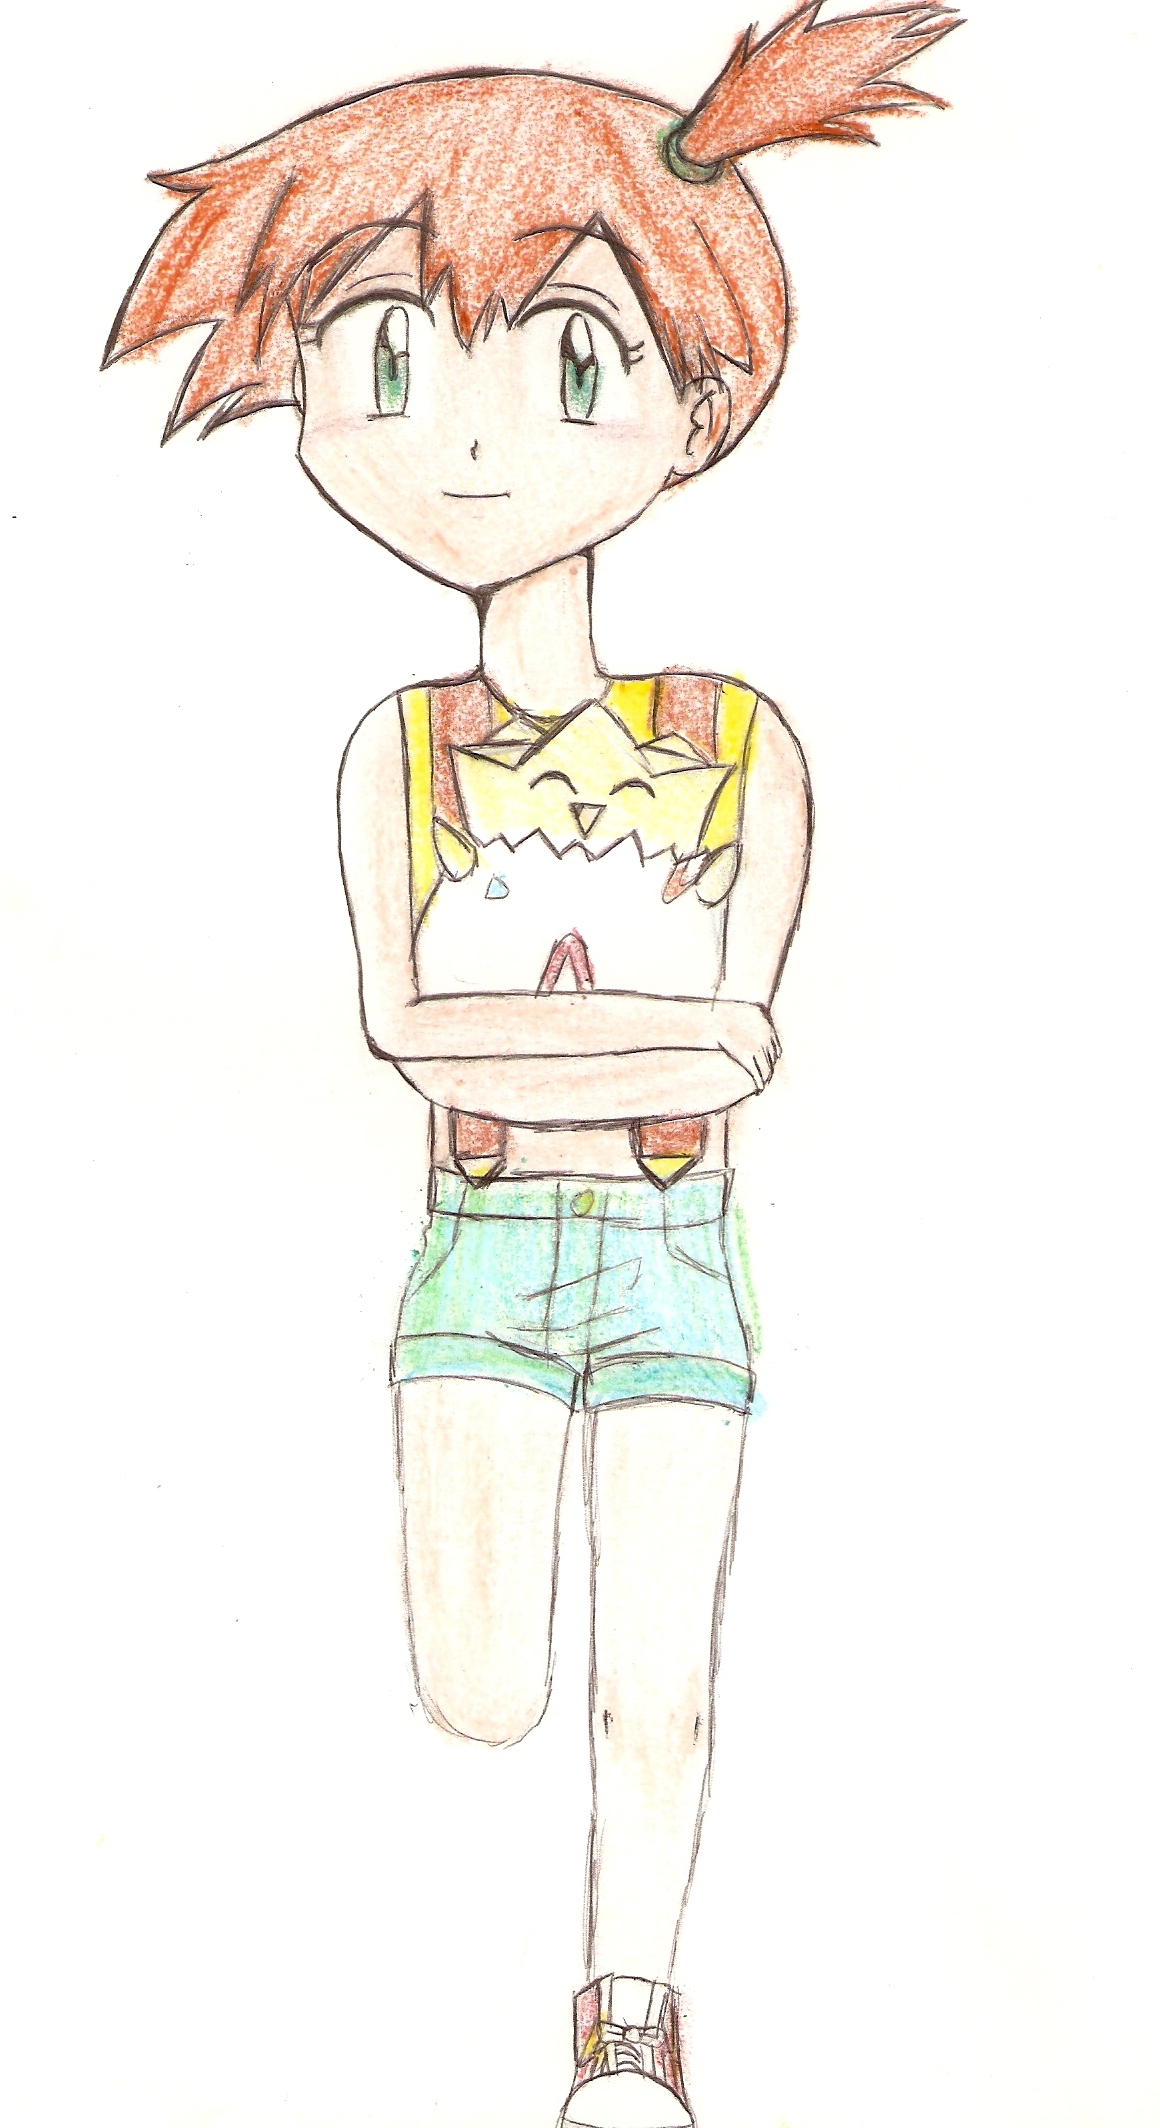 Misty by turquoise6713